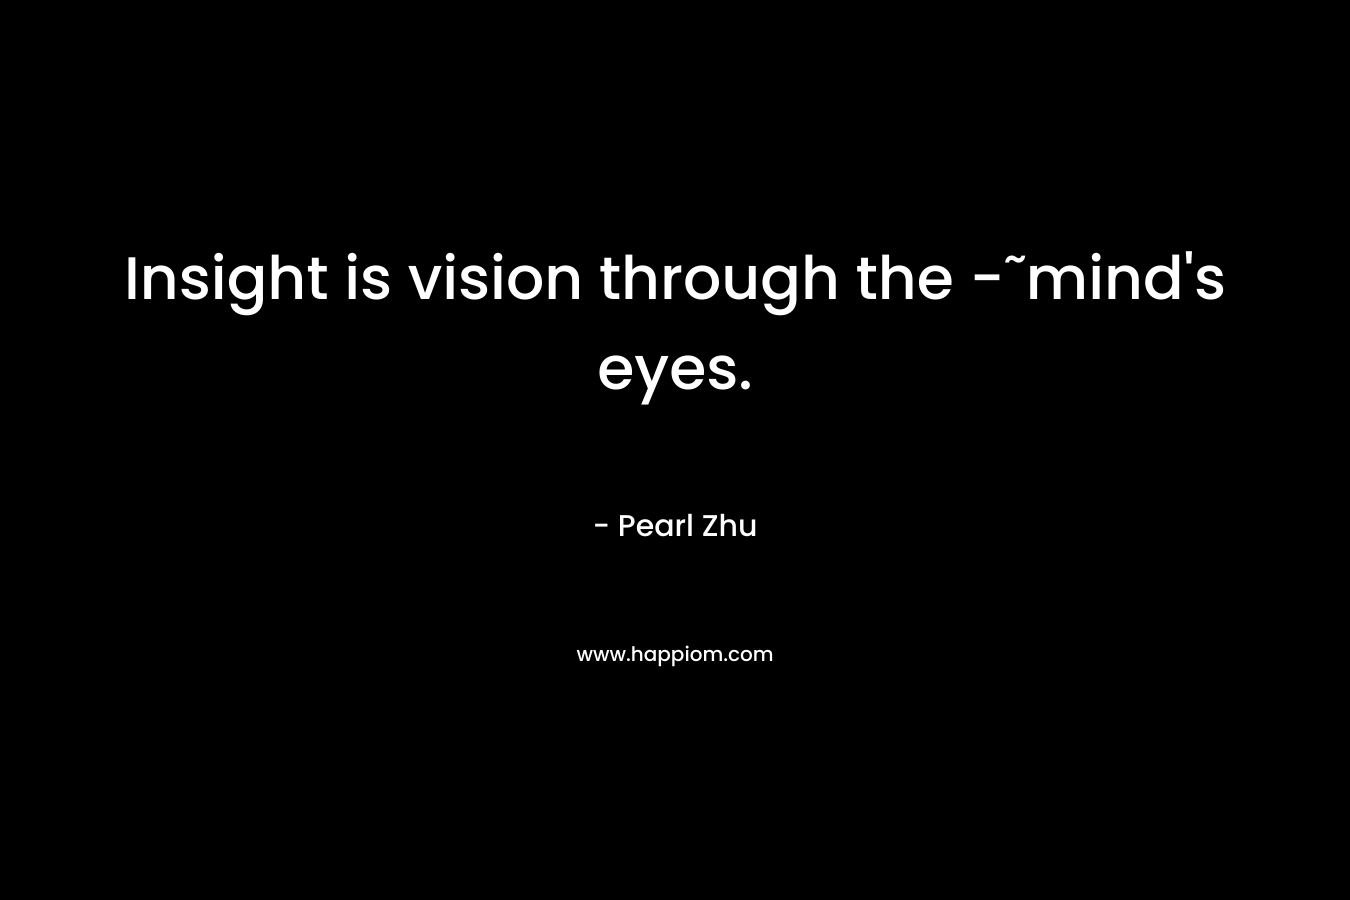 Insight is vision through the -˜mind's eyes.